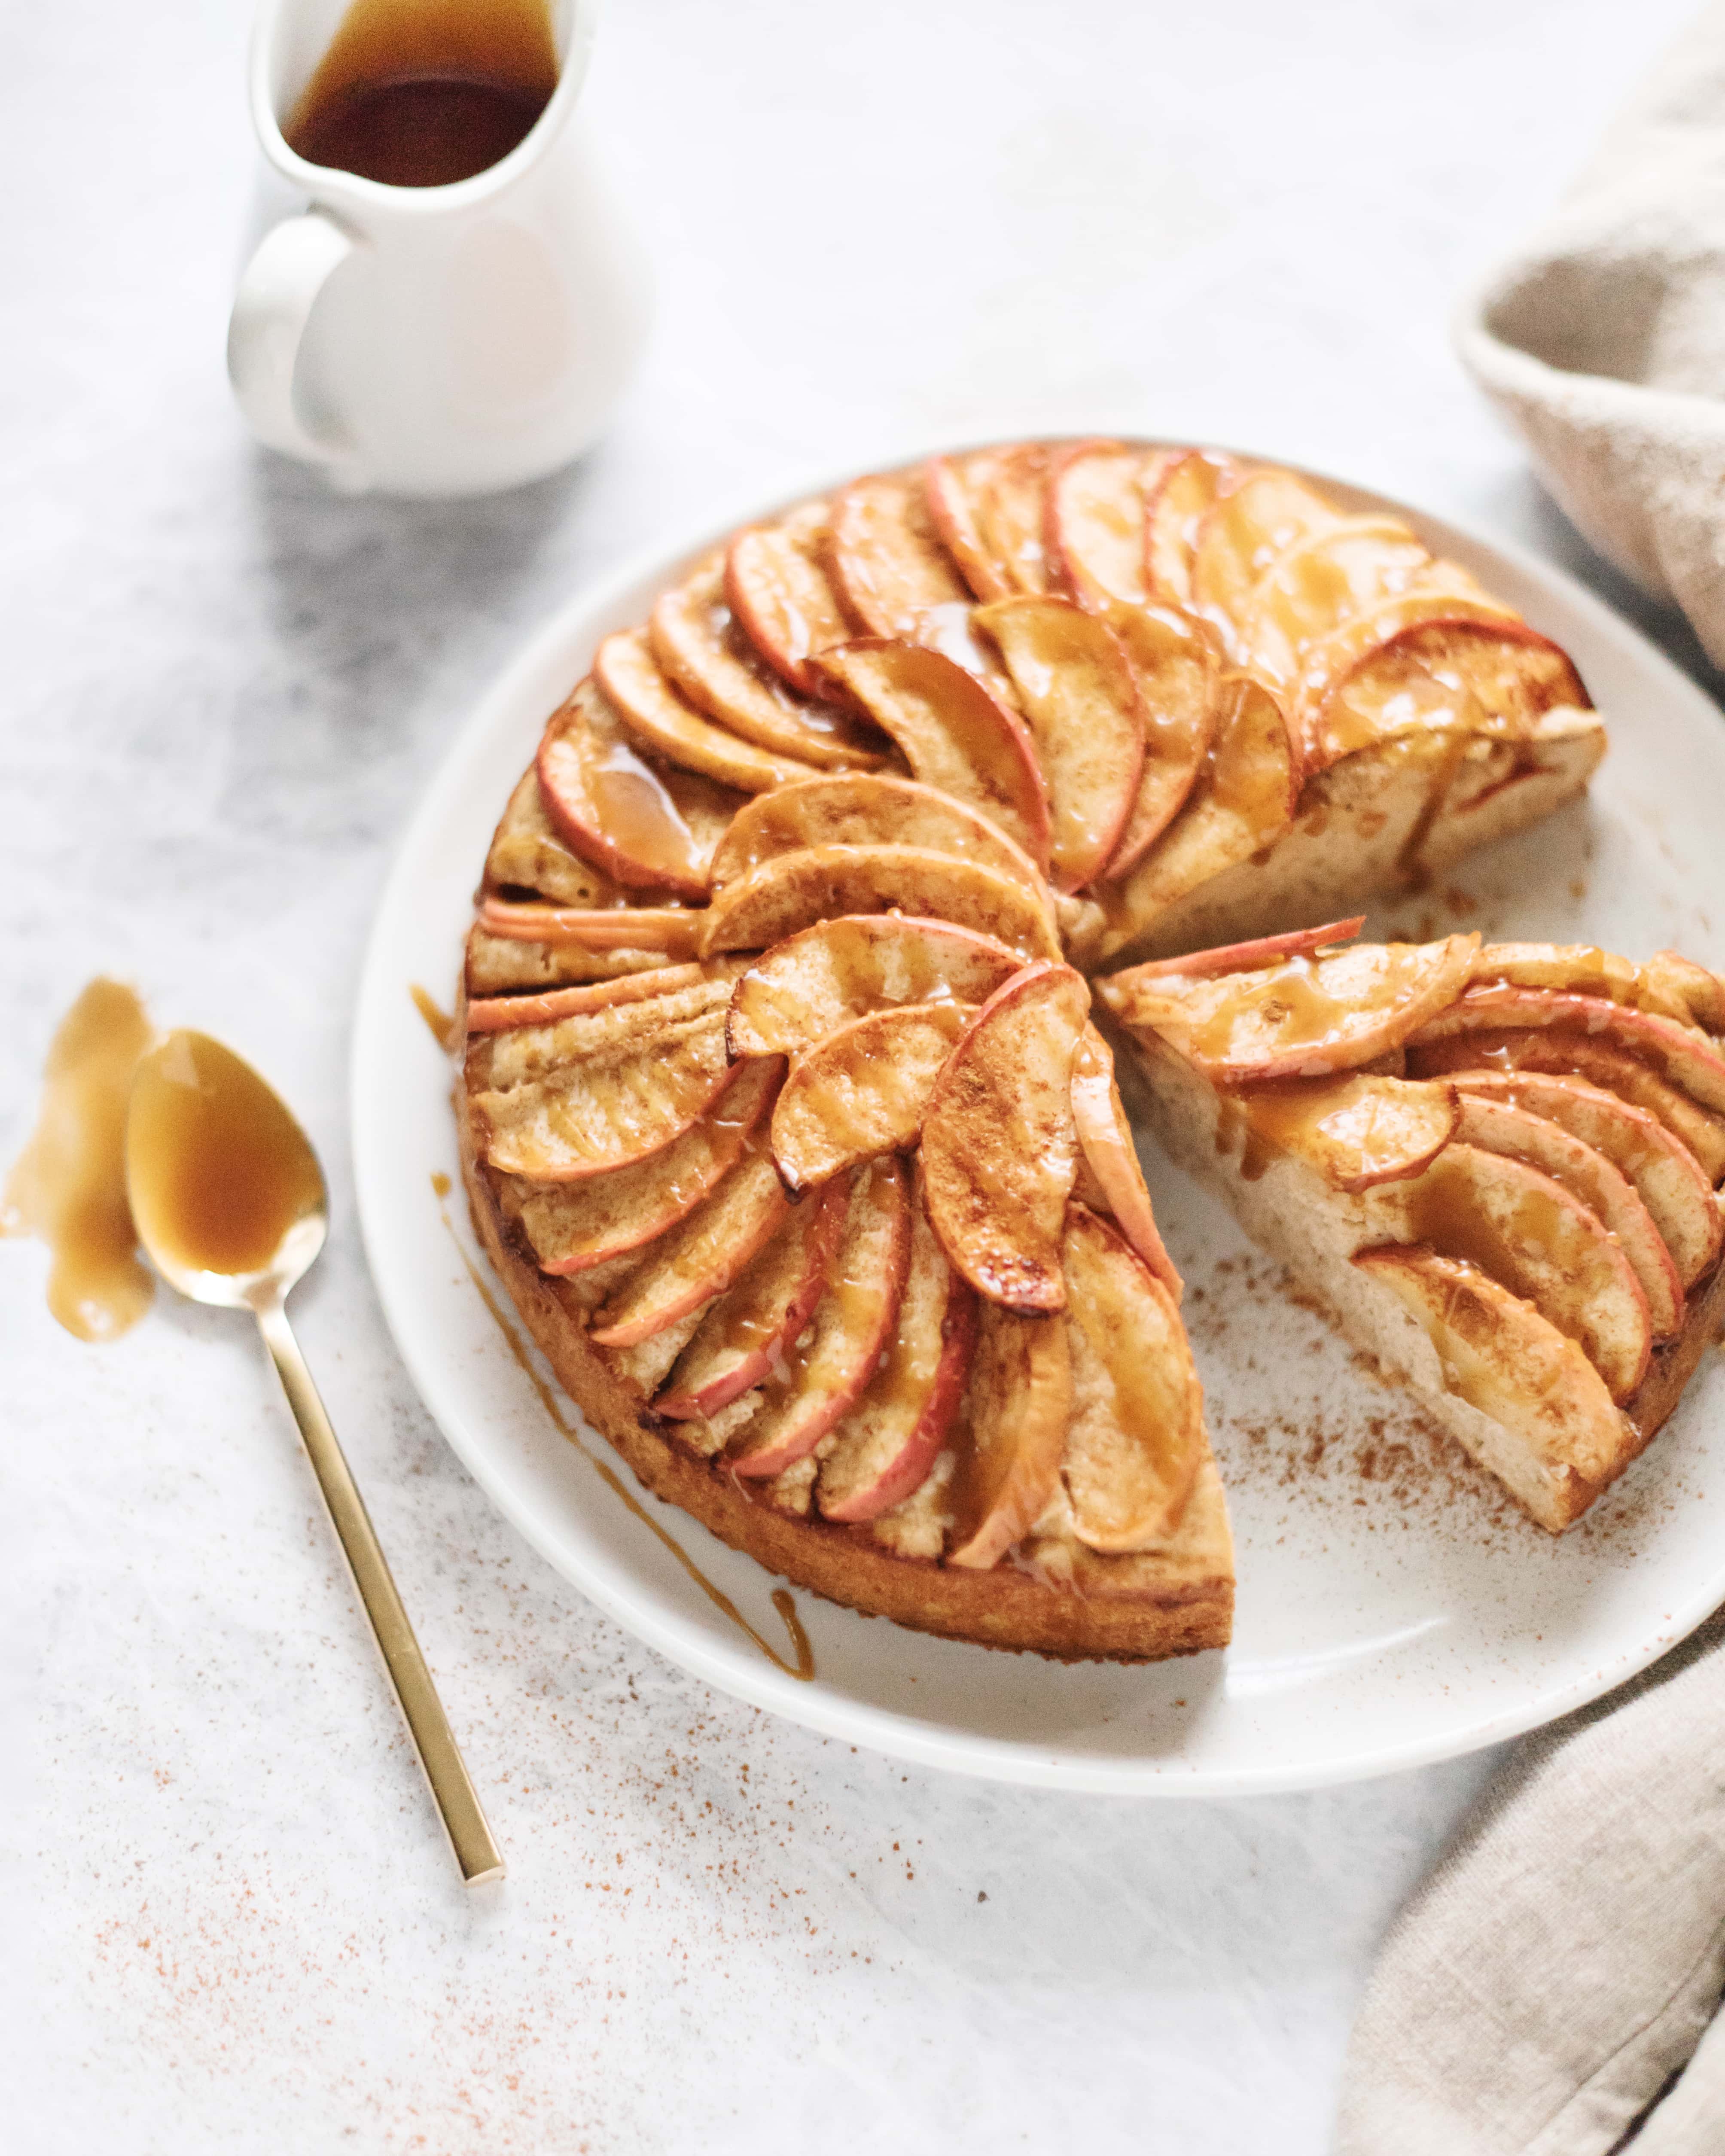 A slice cut out of a spiced apple cake with salted maple caramel drizzle